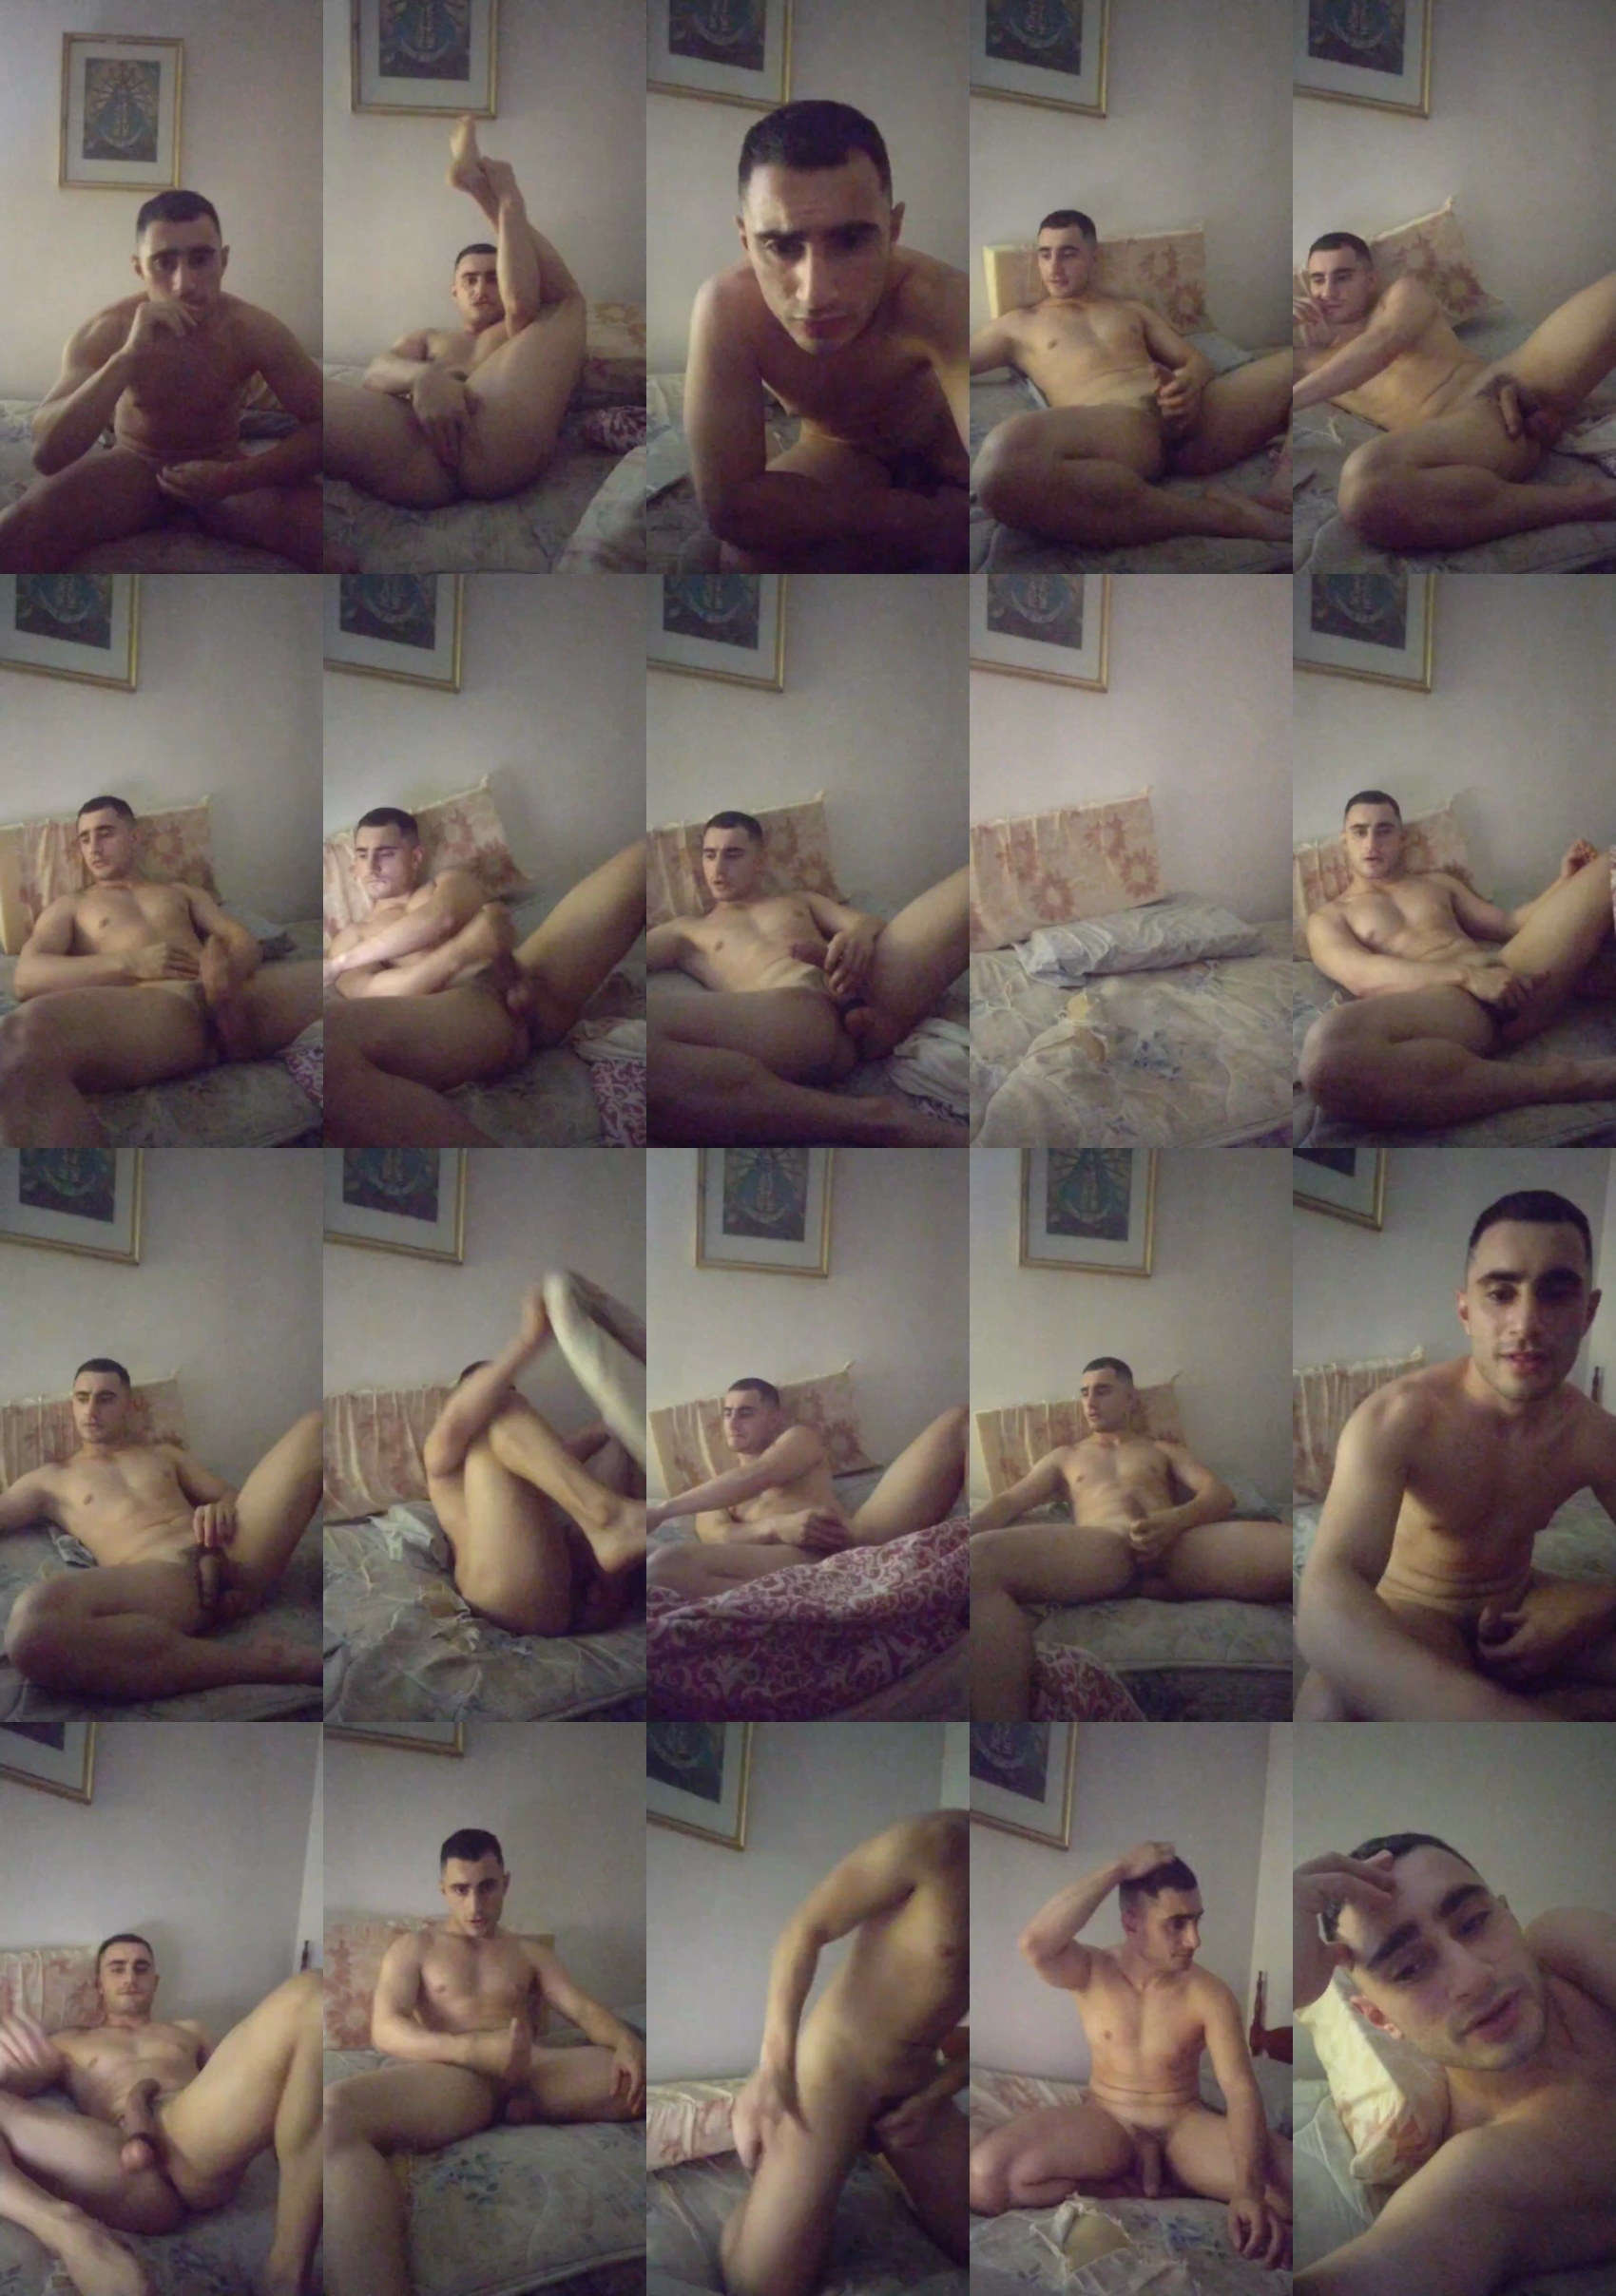 rinaldy  14-02-2022 Recorded Video handsome